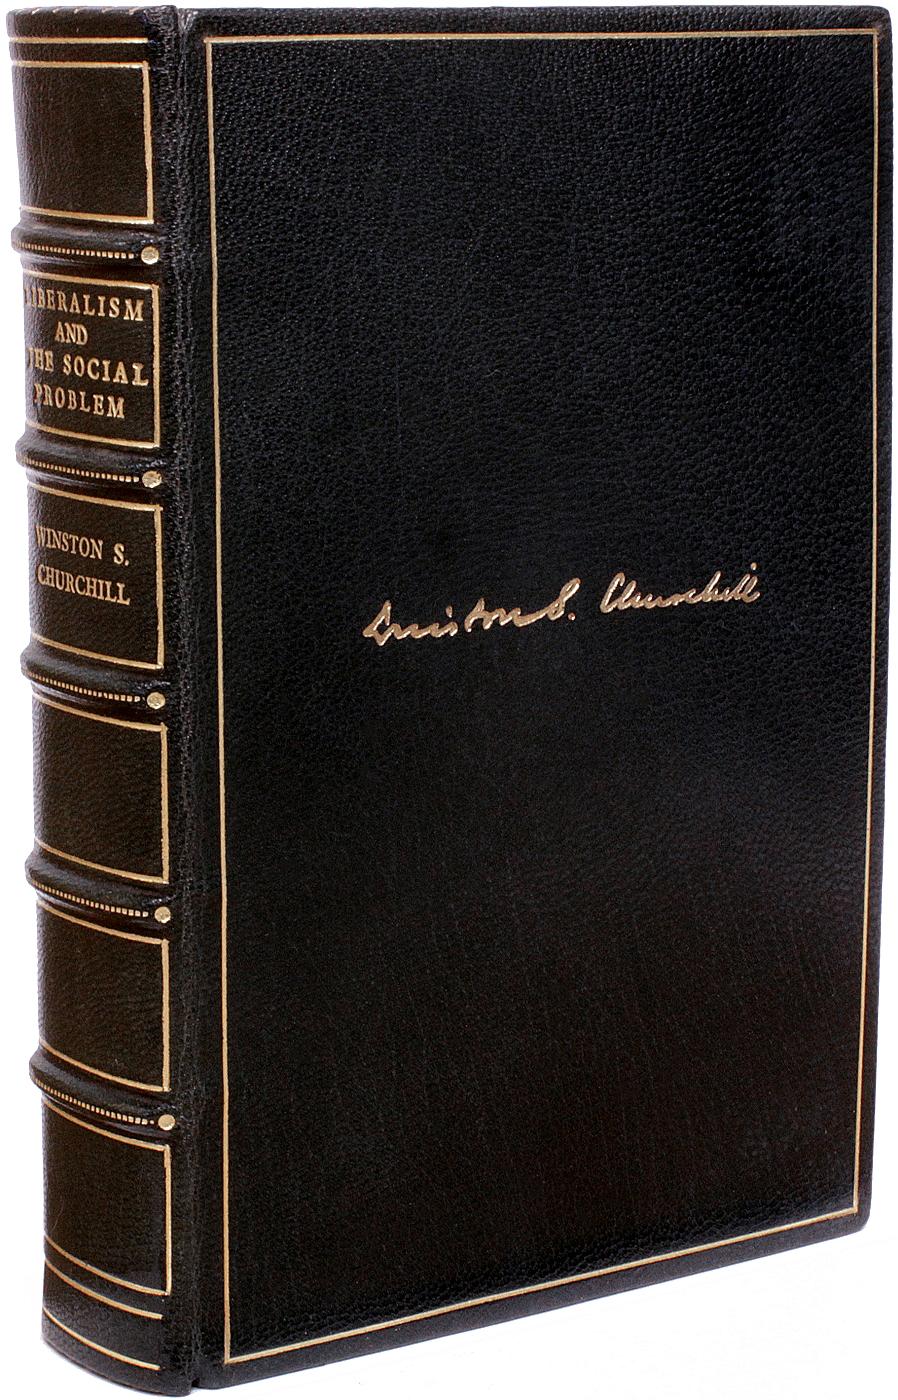 Early 20th Century Winston CHURCHILL. Liberalism And The Social Problem - FIRST EDITION - 1909 For Sale